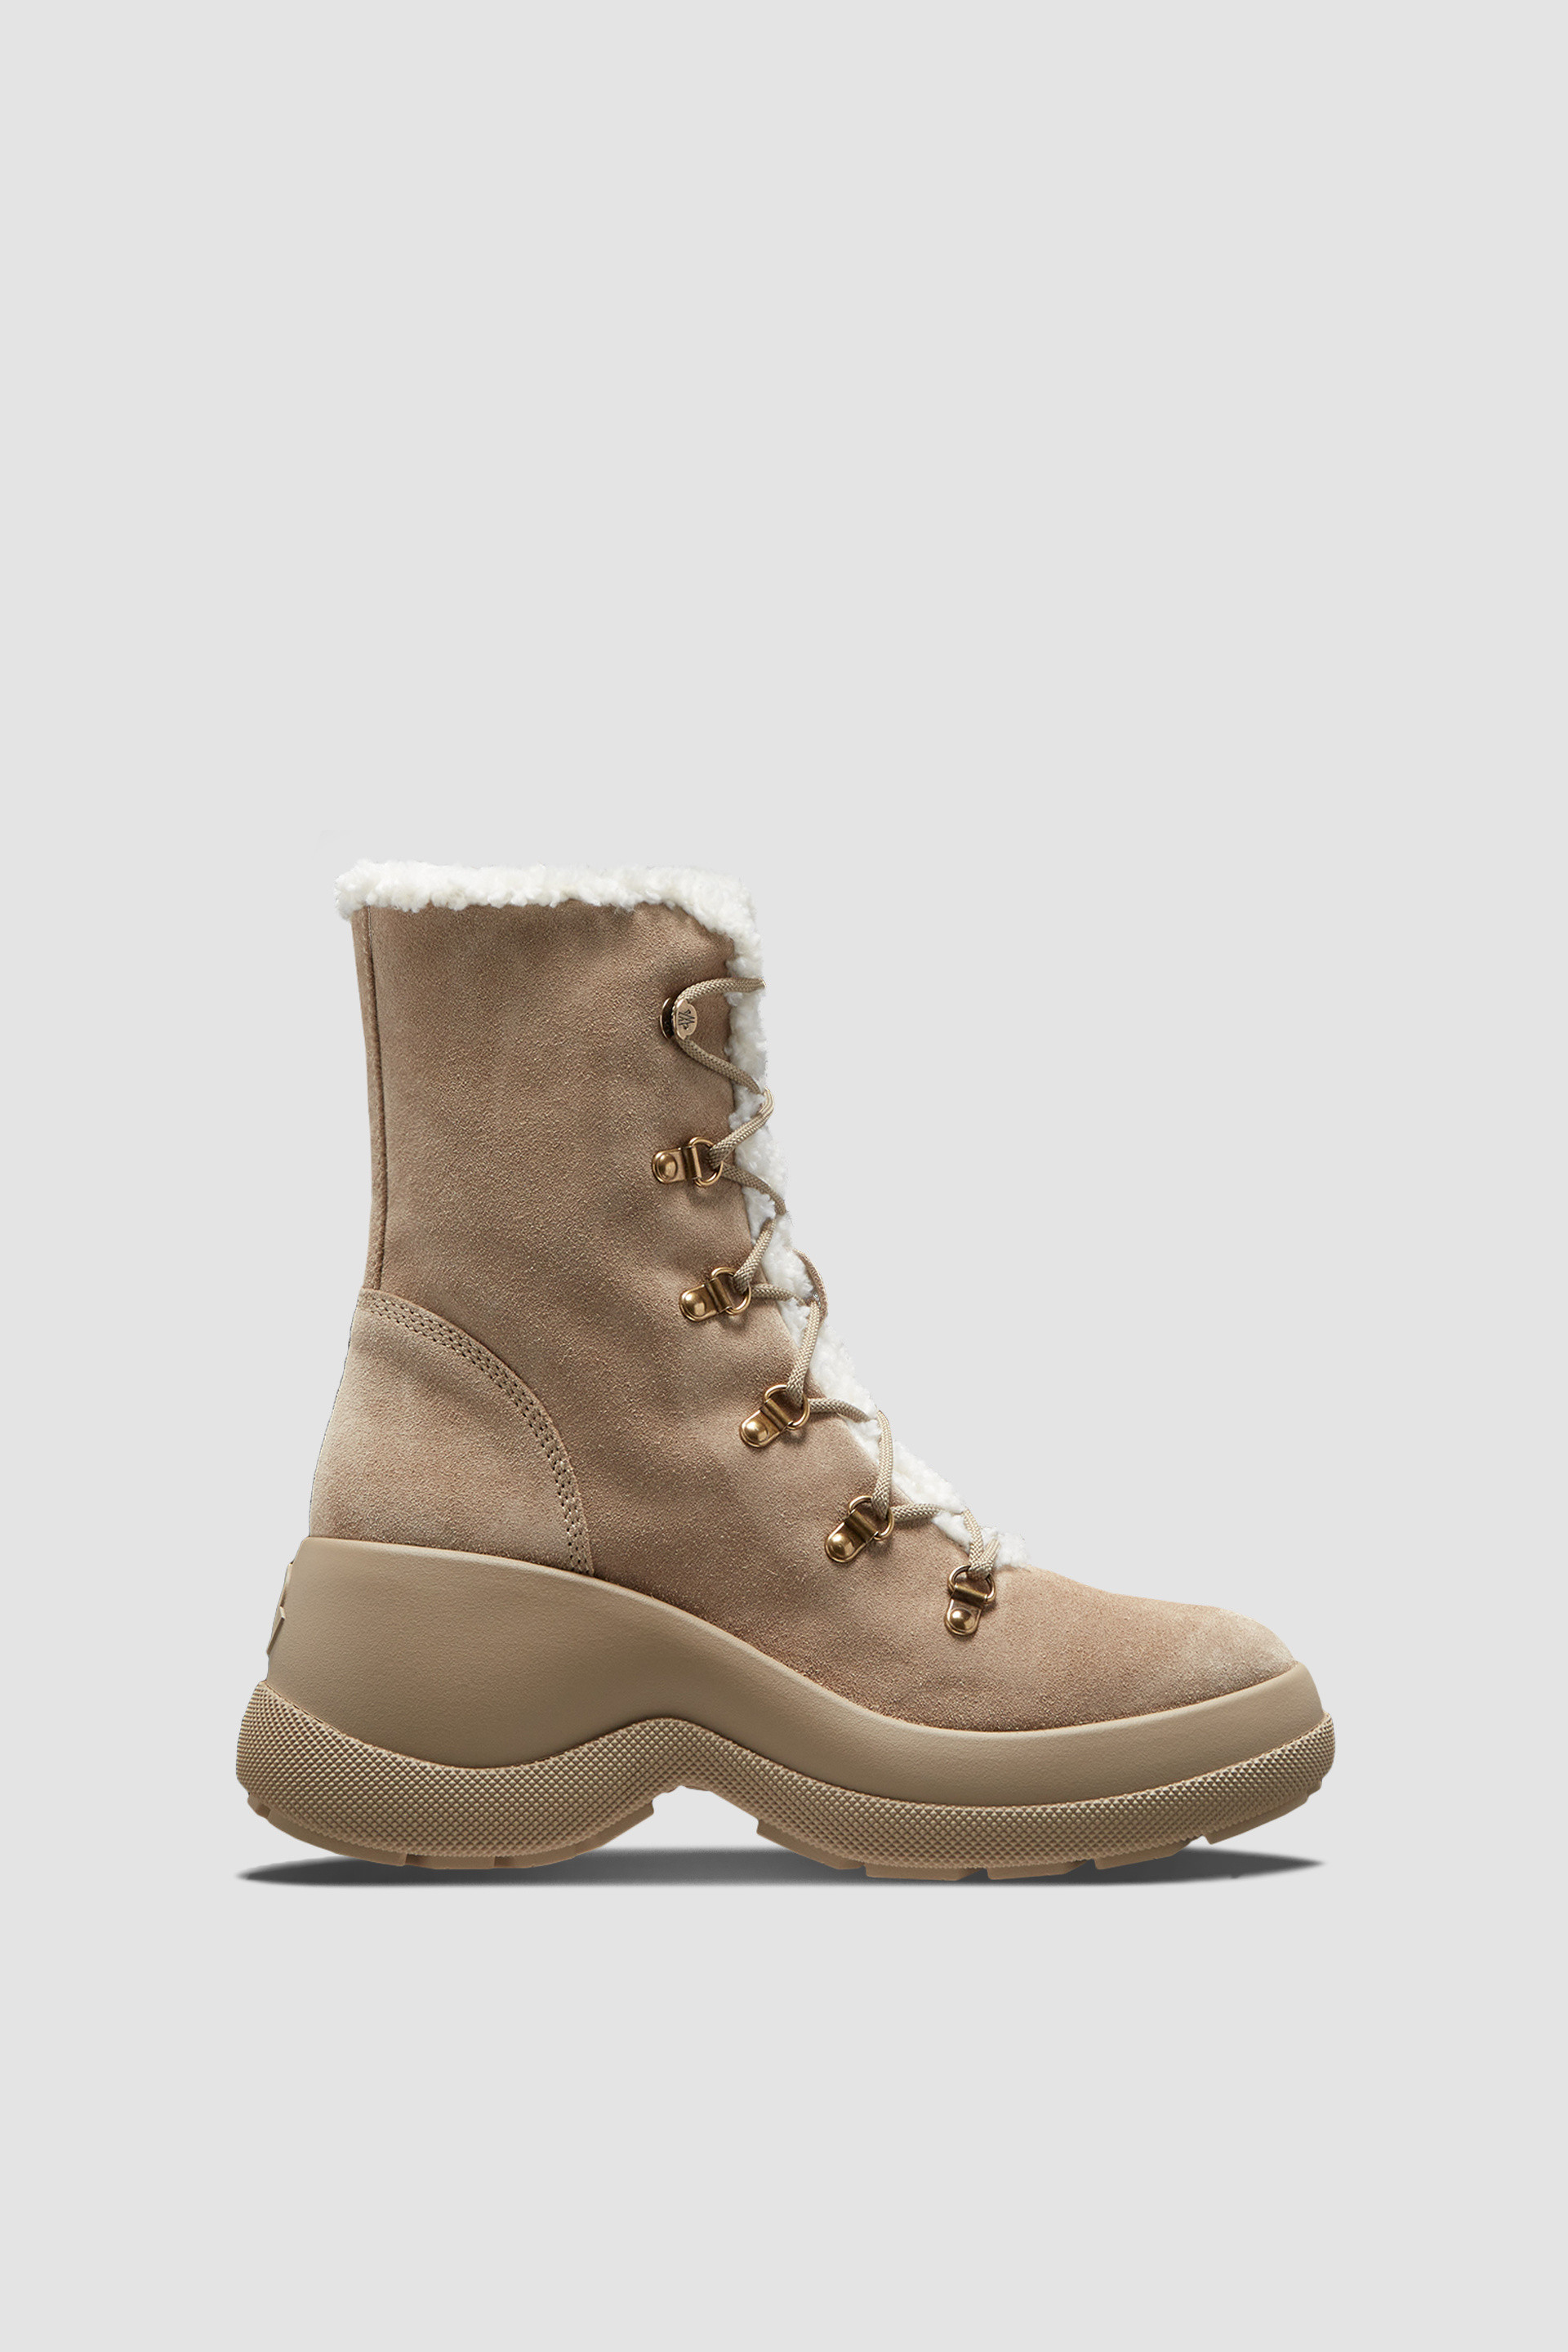 Resile Trek Lace-Up Boots